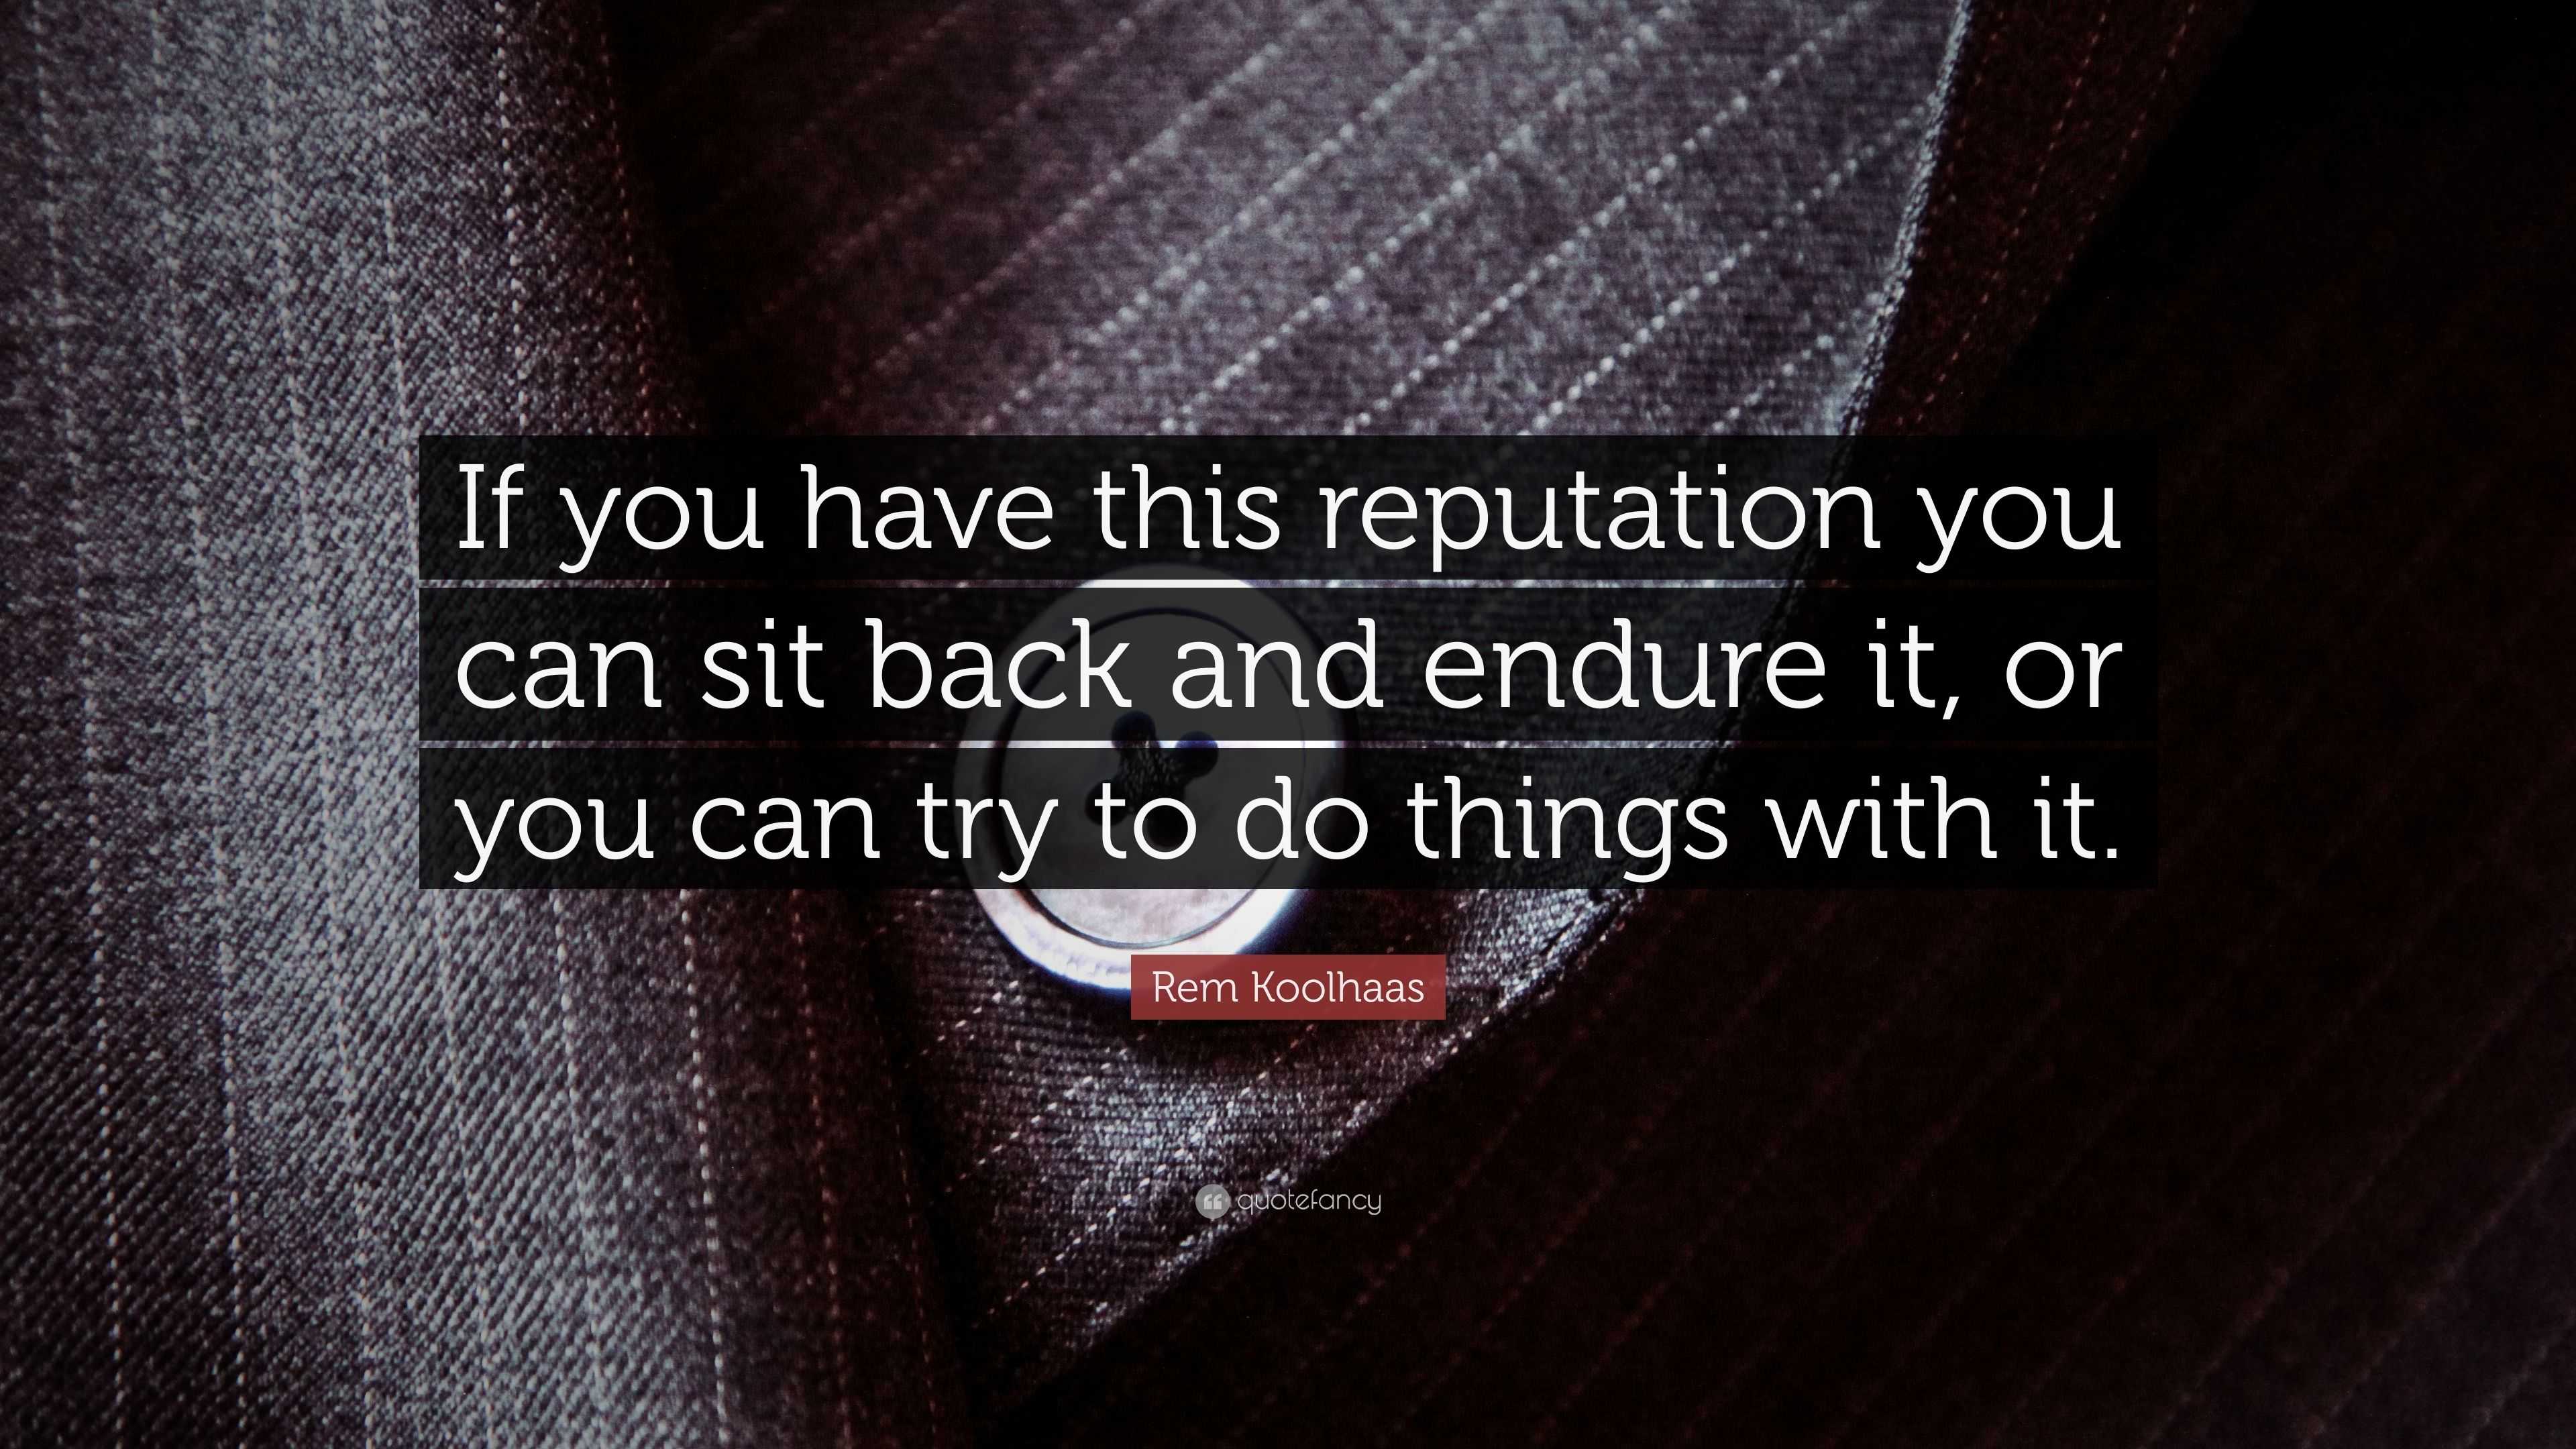 Rem Koolhaas Quote “if You Have This Reputation You Can Sit Back And Endure It Or You Can Try